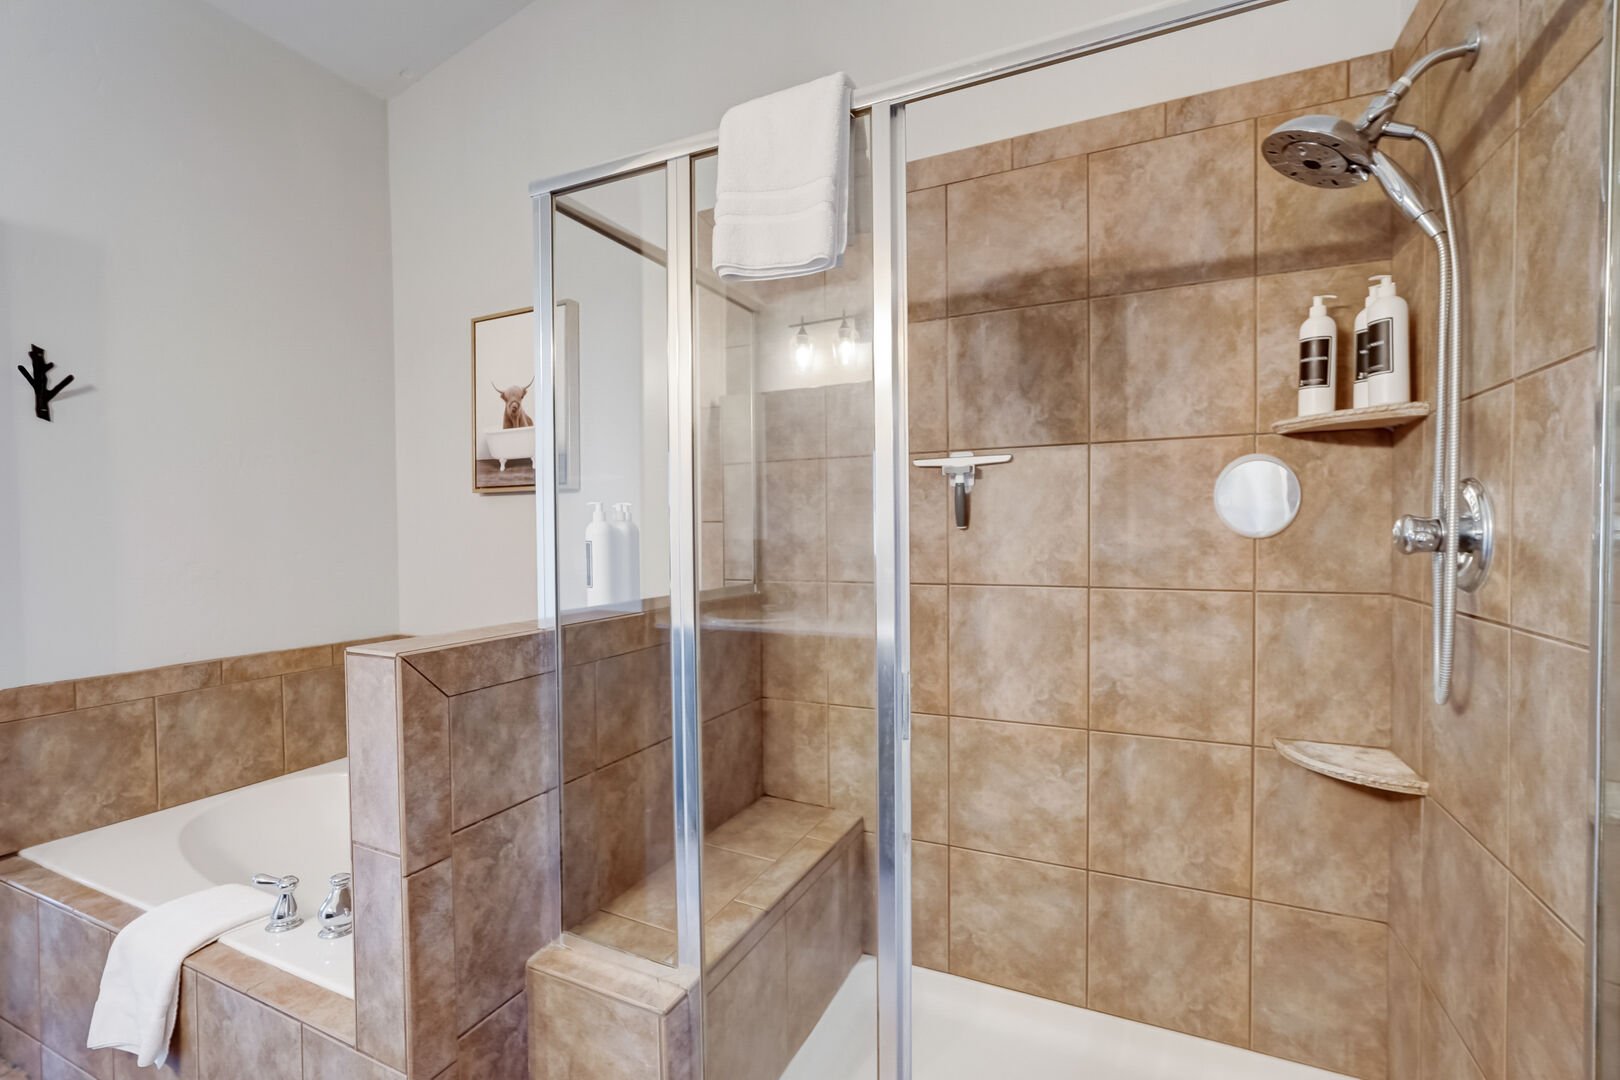 Primary Bathroom with Soaking Tub & Walk-In Shower (Top Level)